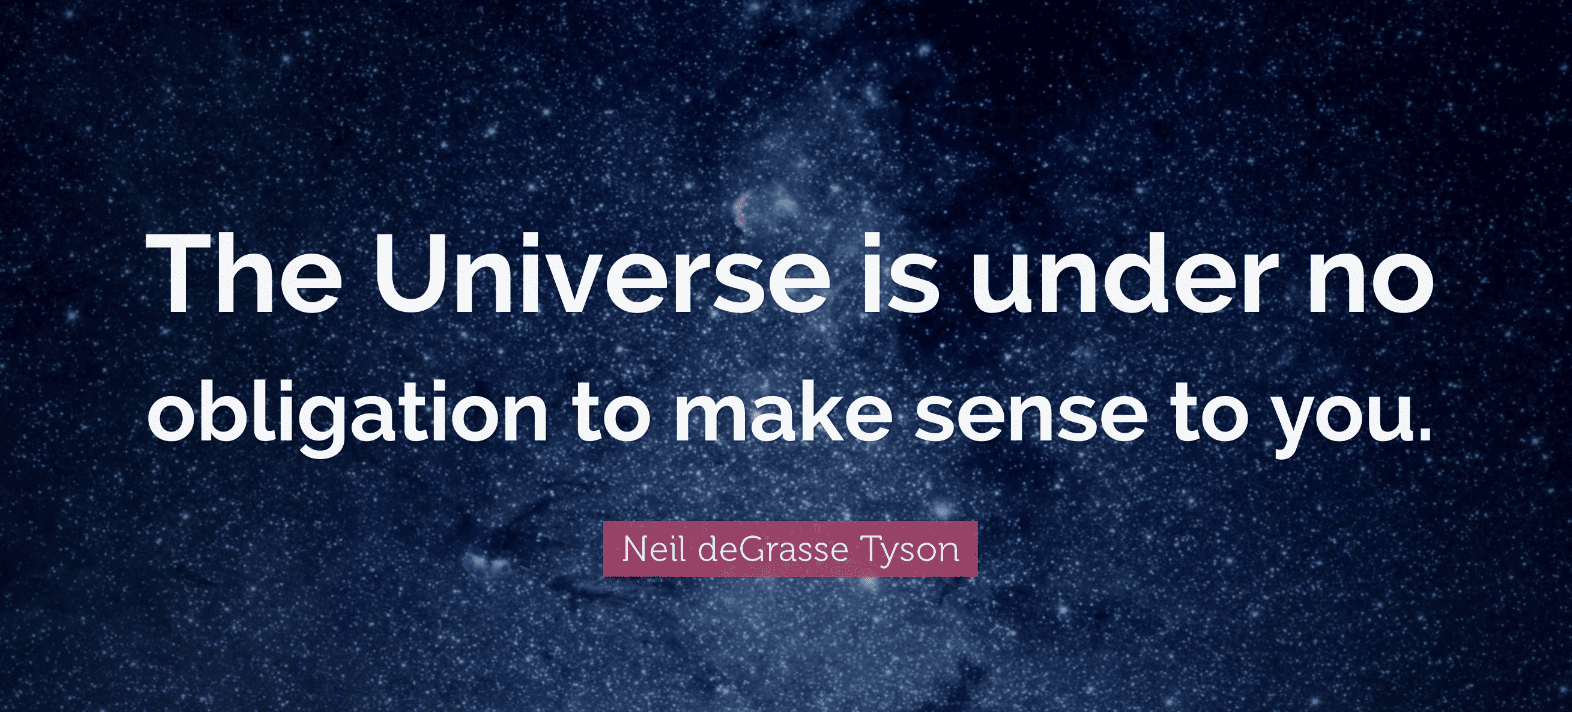 This Advice from Neil deGrasse Tyson Will Boost Your Brainpower